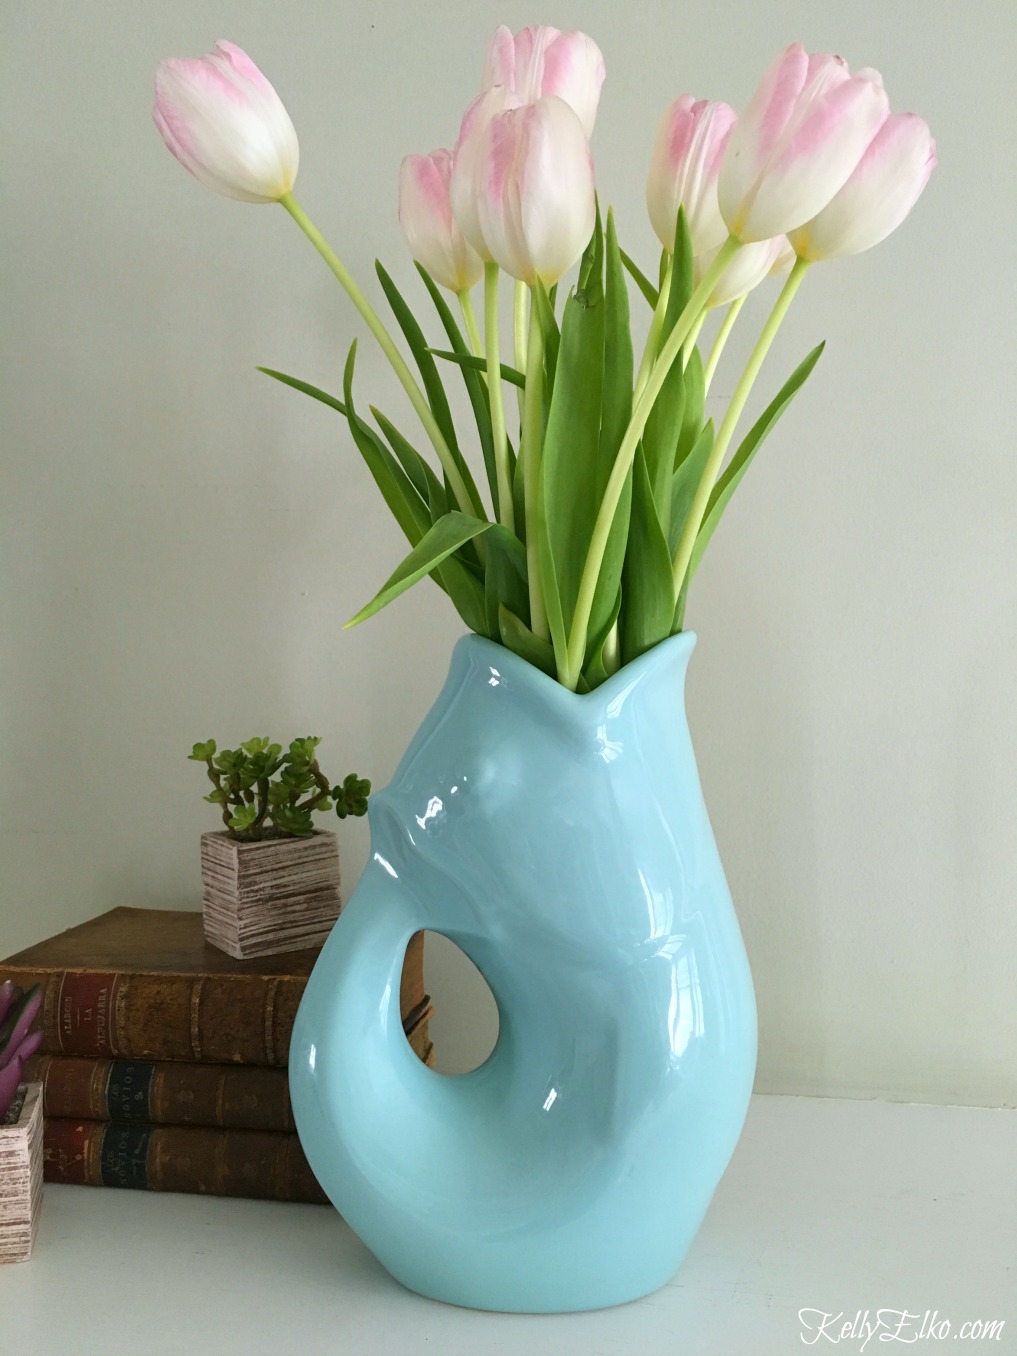 Gurgle pot - this water pitcher makes the coolest gurgling sound when pouring from it kellyelko.com